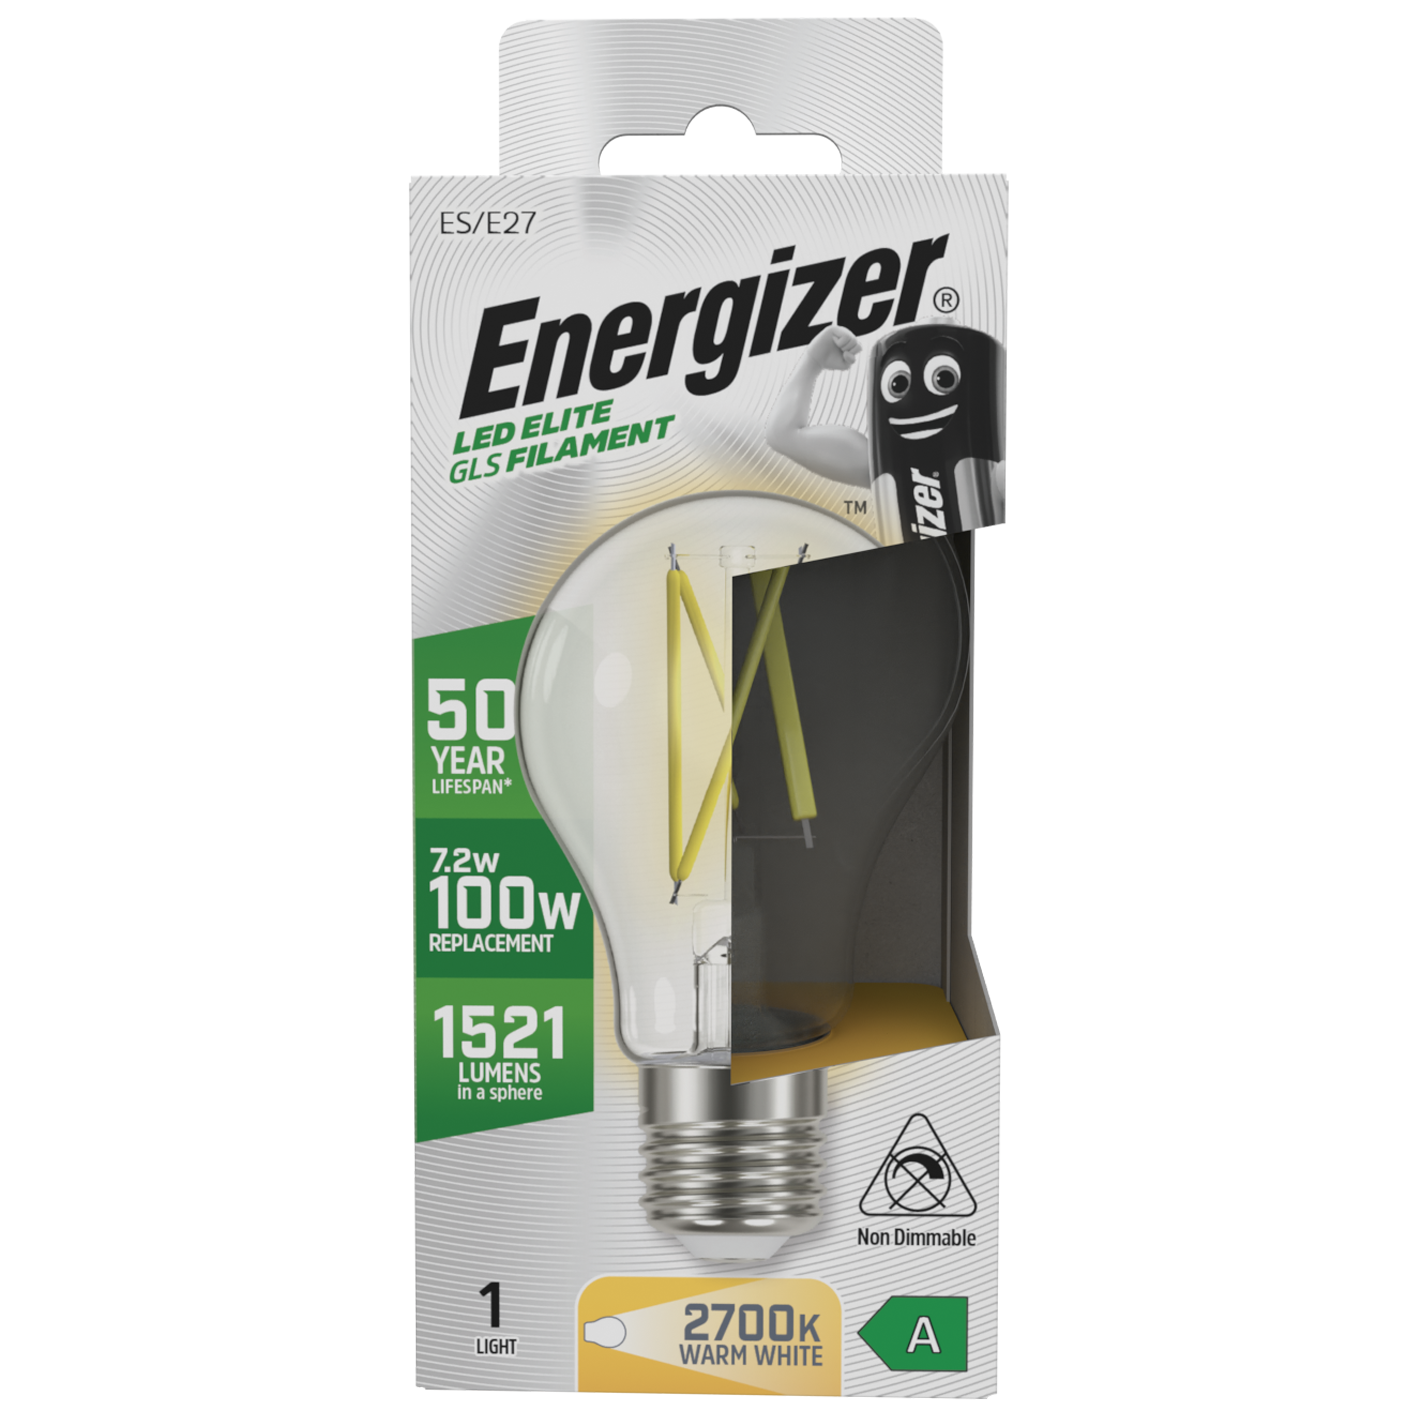 S29632 Energizer A Rated LED Elite GLS E27 Filament 1521lm 7.2W 2700K (Warm White) - Box of 1